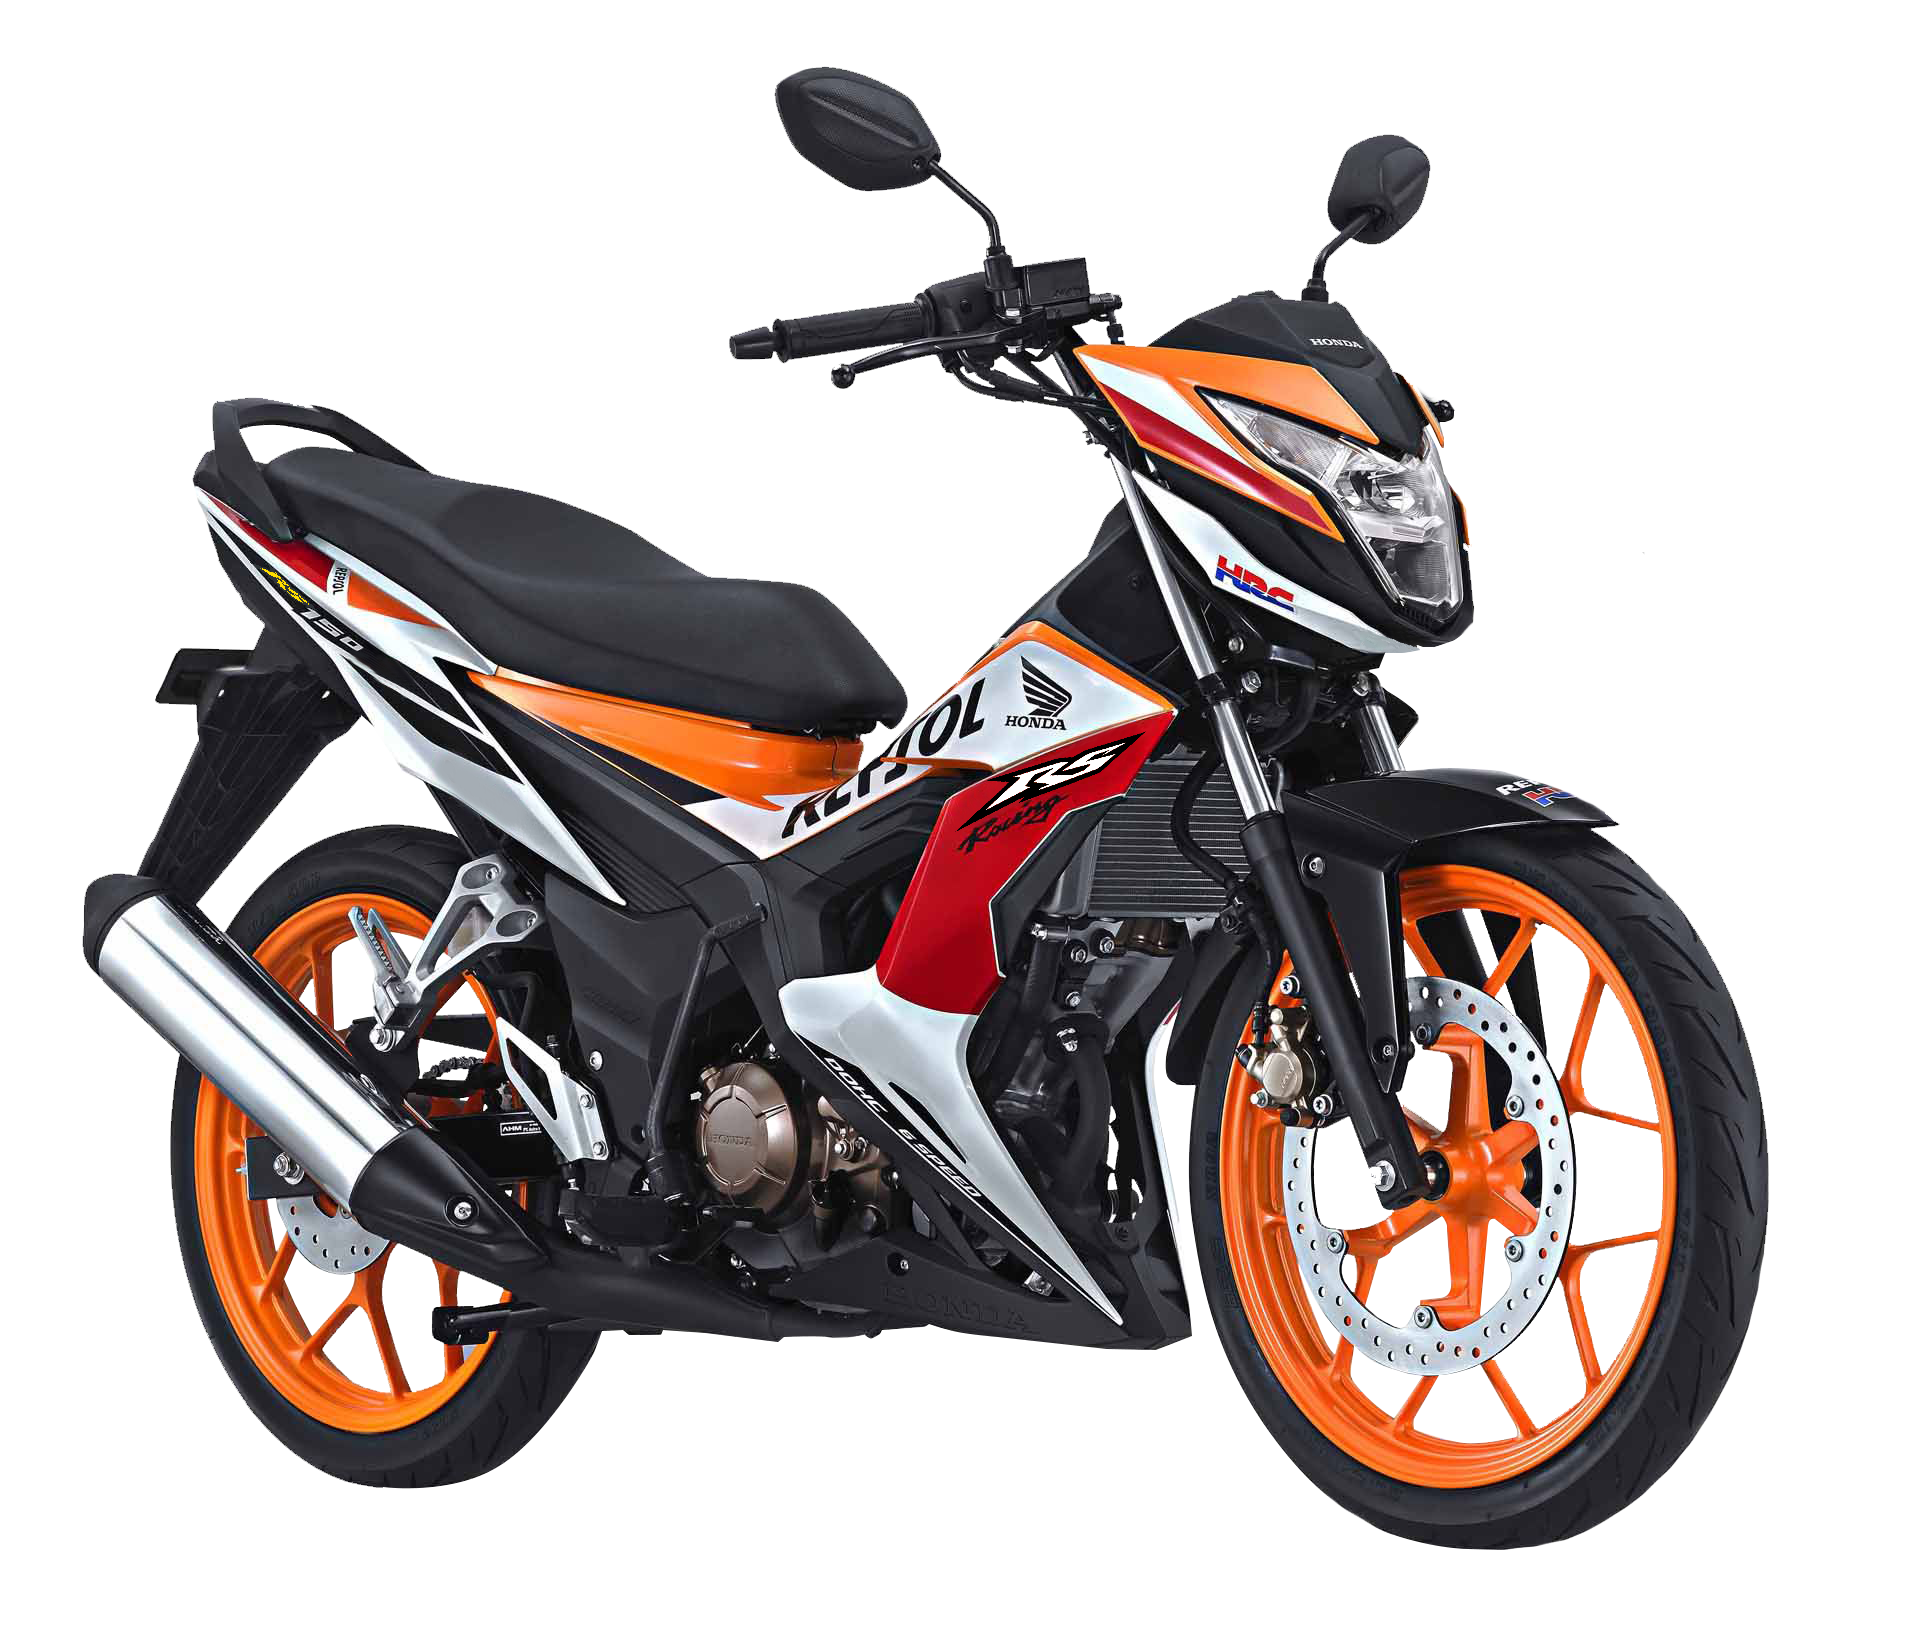 Ambassade banjo Parameters Honda Philippines Inc. RS150, now in a remarkable and stunning Repsol  Edition – Motoph – motoph.com